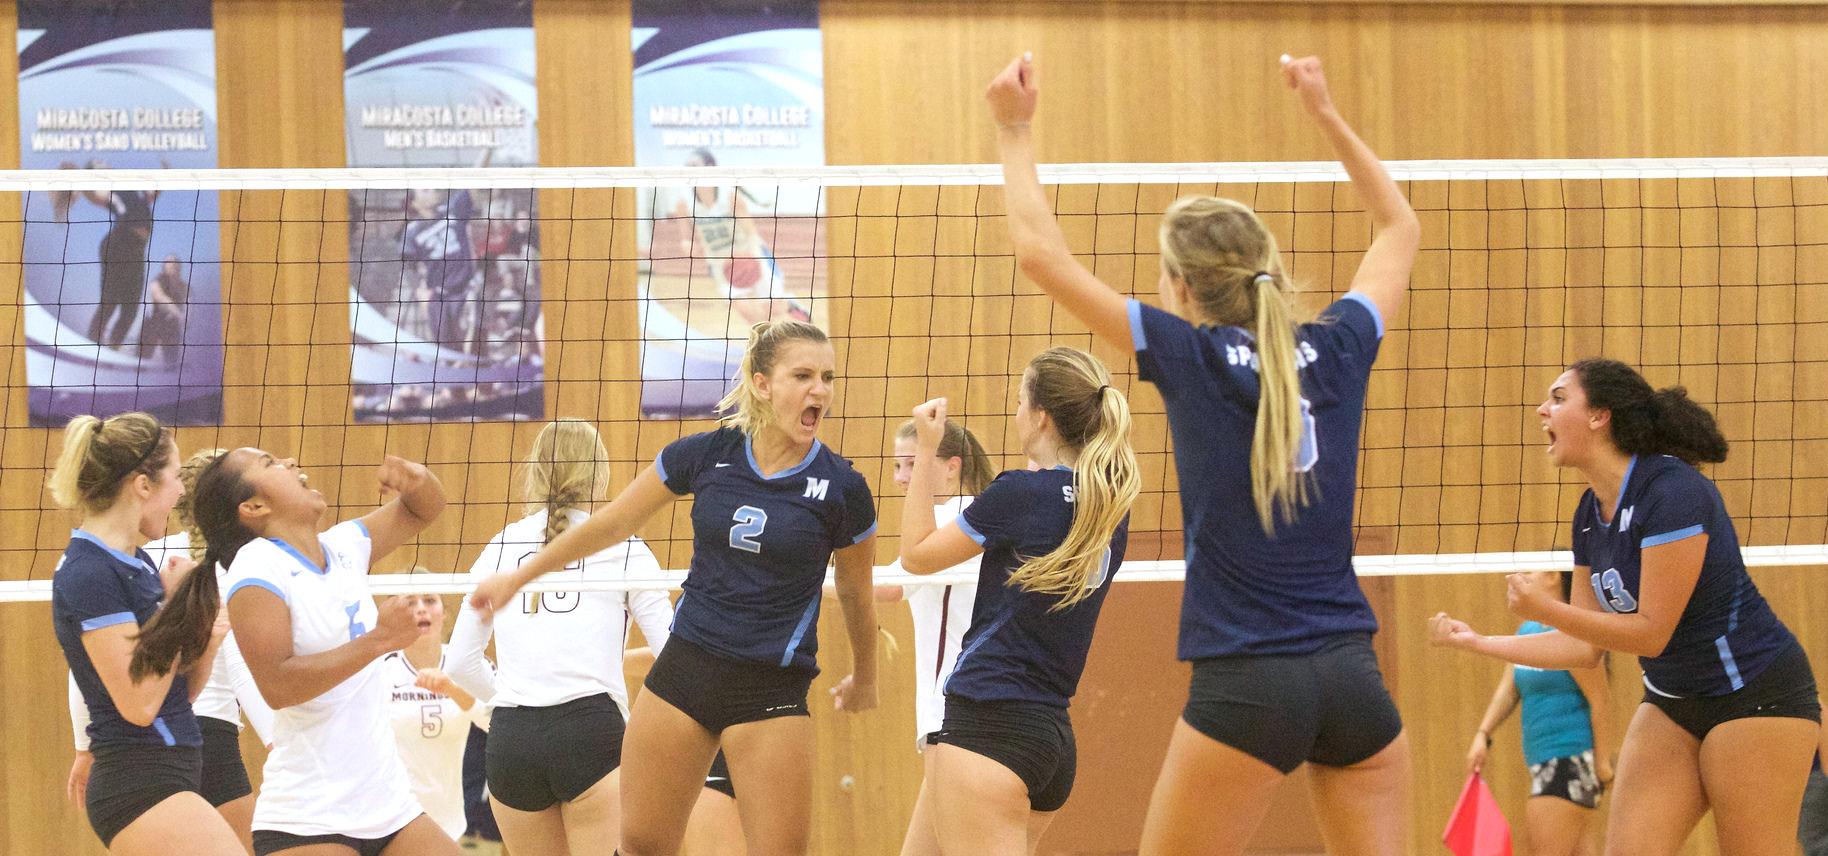 Women's volleyball team celebrating a point.